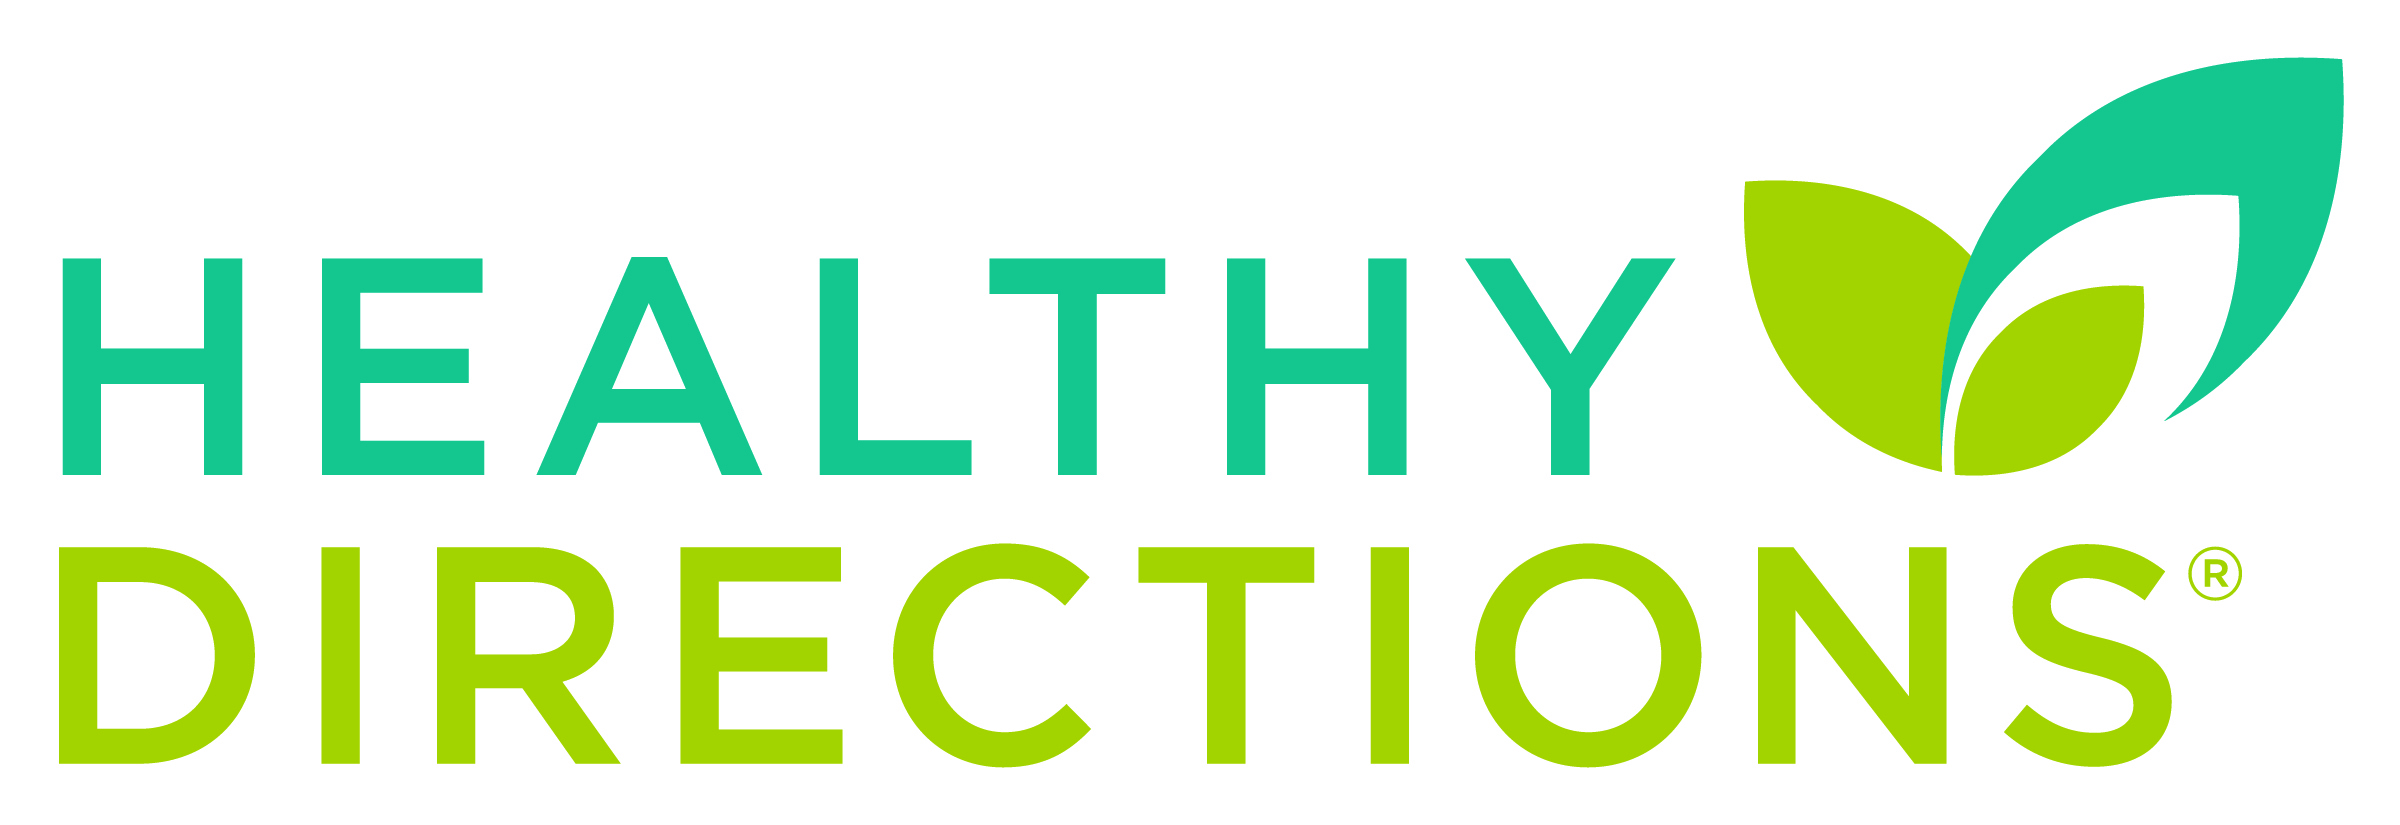 Healthy Directions LLC is a leading health publisher and direct-to-consumer retailer of doctor-formulated nutritional supplements and skincare products, dedicated to providing people with a better pat